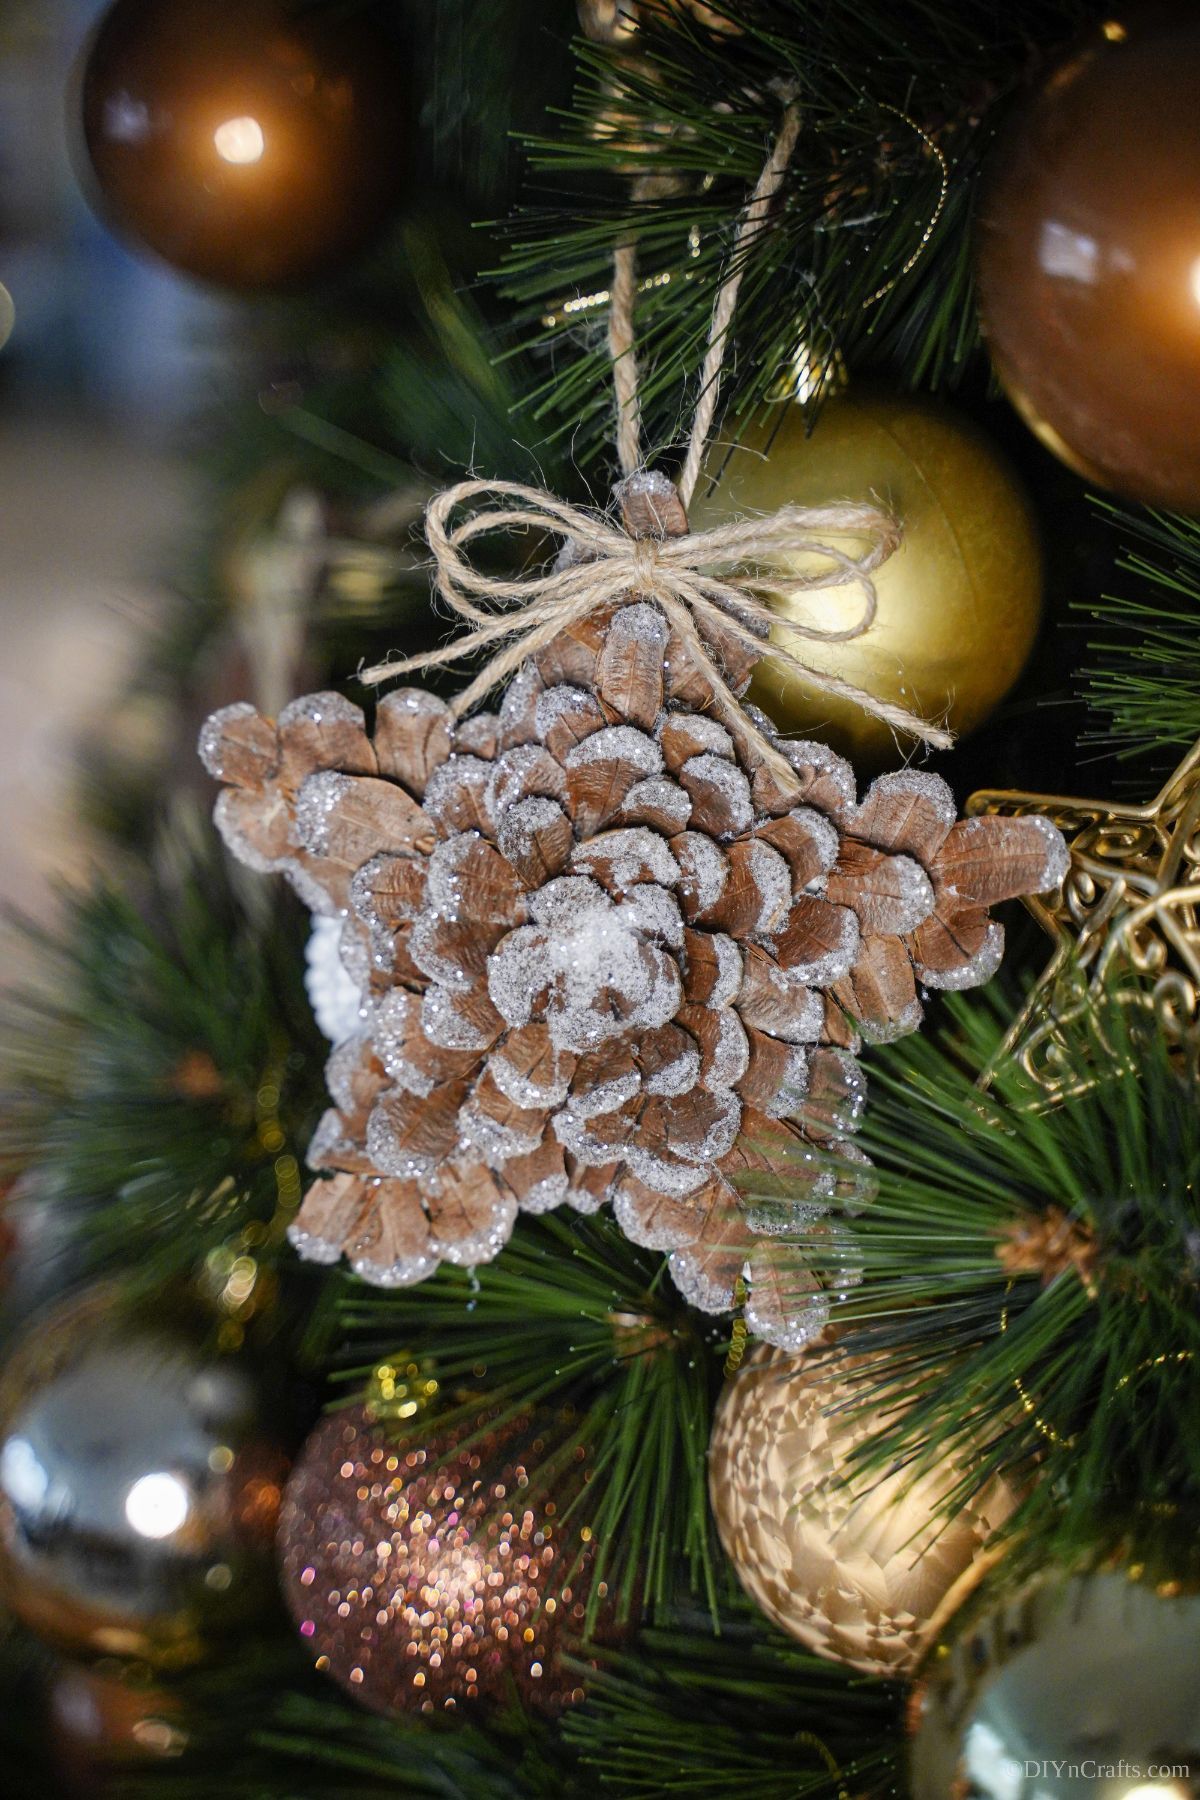 pinecone star ornament on holiday tree with gold ornaments